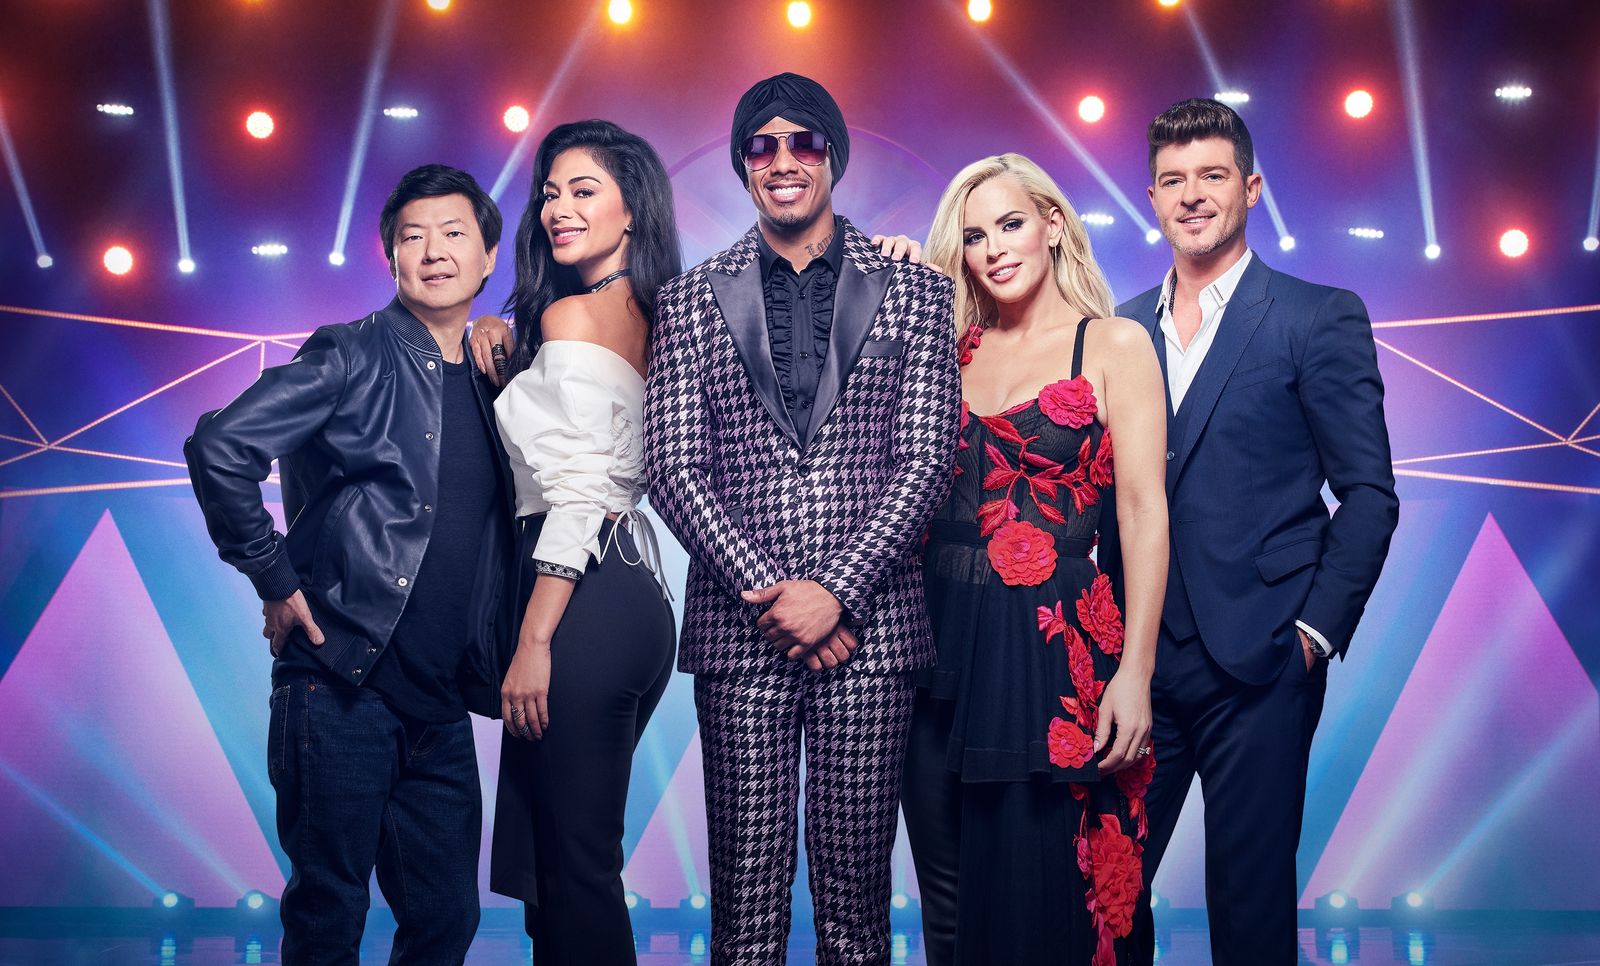 Ken Jeong, Nicole Scherzinger, Nick Cannon, Jenny McCarthy, and Robin Thicke on season 1 of "The Masked Singer" on June 13, 2018 | Photo: FOX Image Collection/Getty Images